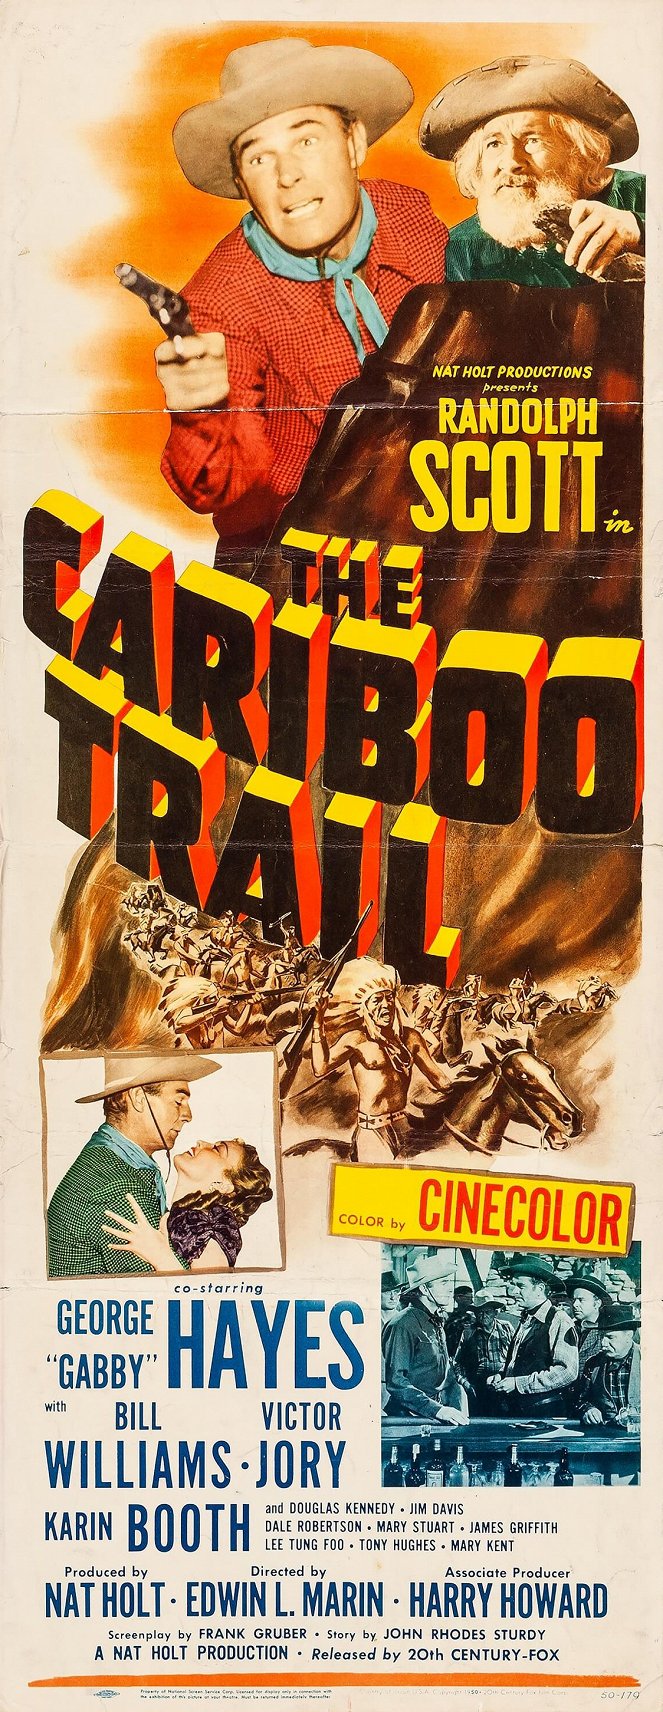 The Cariboo Trail - Posters